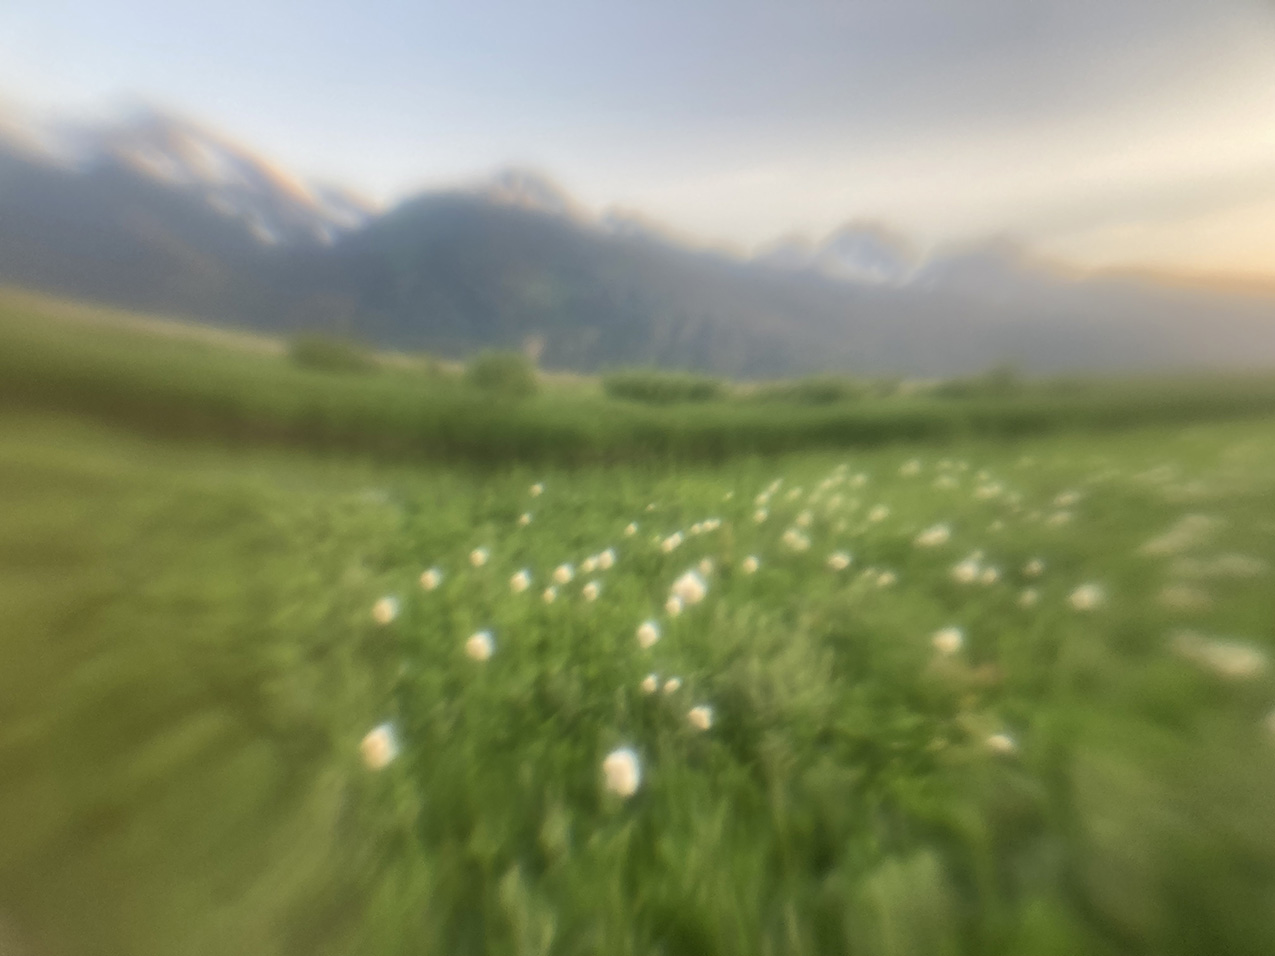 Hazy unfocused image of cottongrass blossoms in a field with mountains in the background